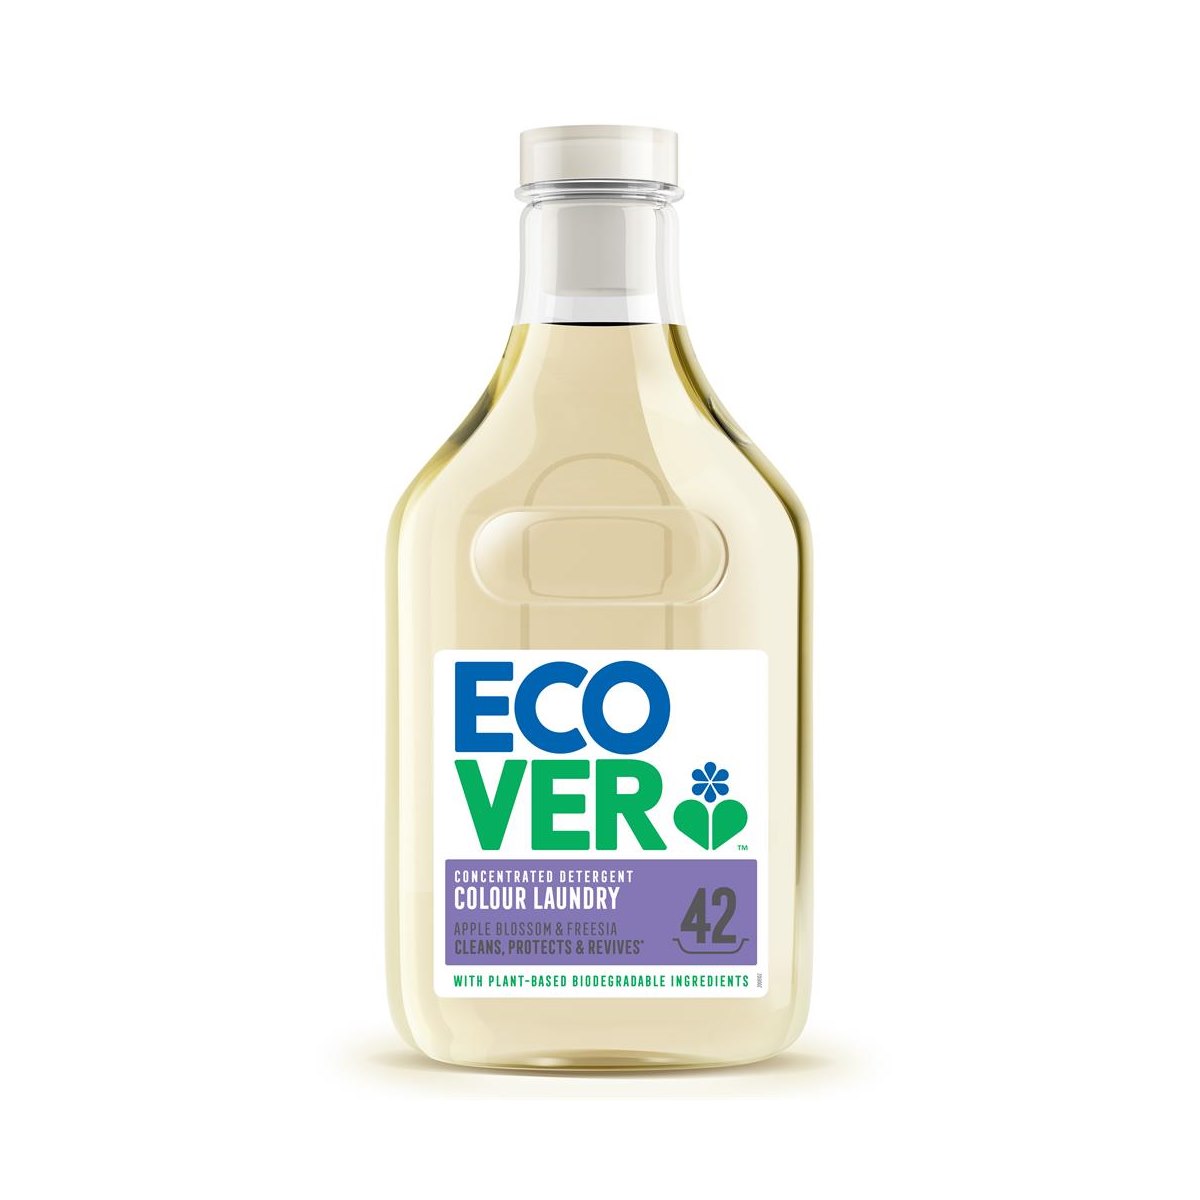 Ecover Colour Laundry Concentrated Detergent Apple Blossom and Freesia 1.5 Litre